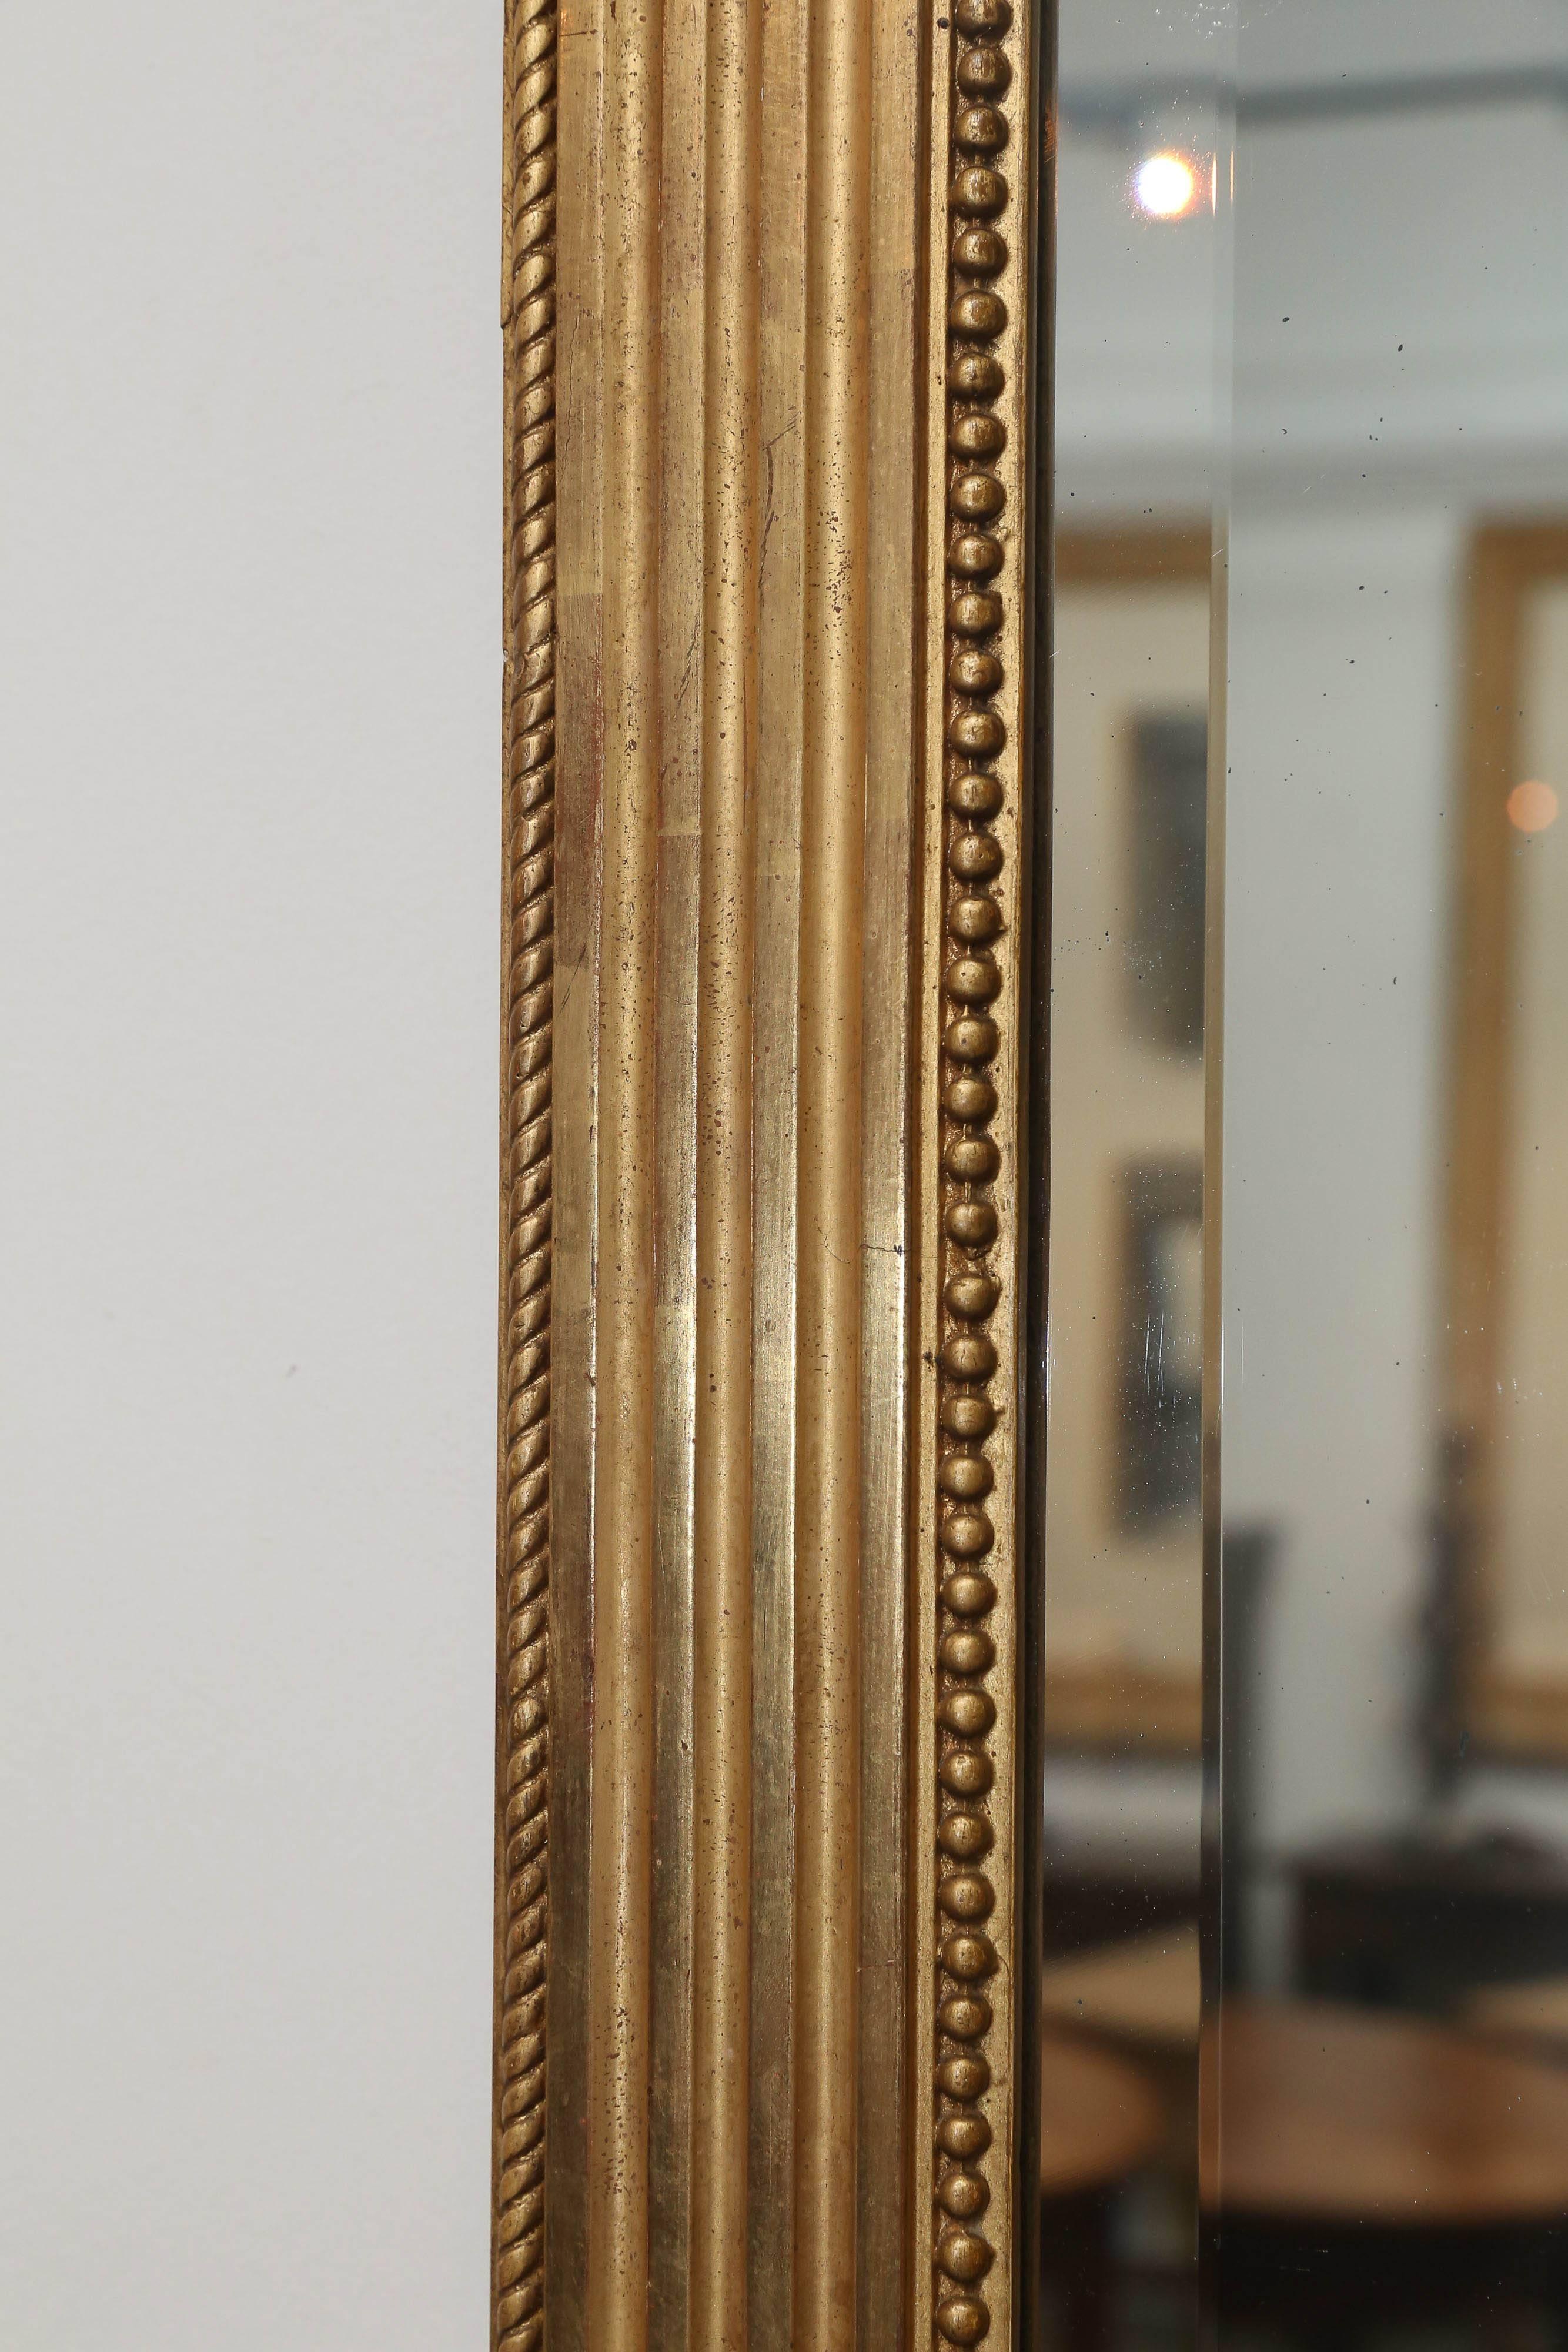 Large gilt reeded antique mirror from France. Pretty detail in each corner and an interior perimeter of pearls. Can be hung horizontally or vertically. Original beveled glass. Original pine board back, circa 1890.